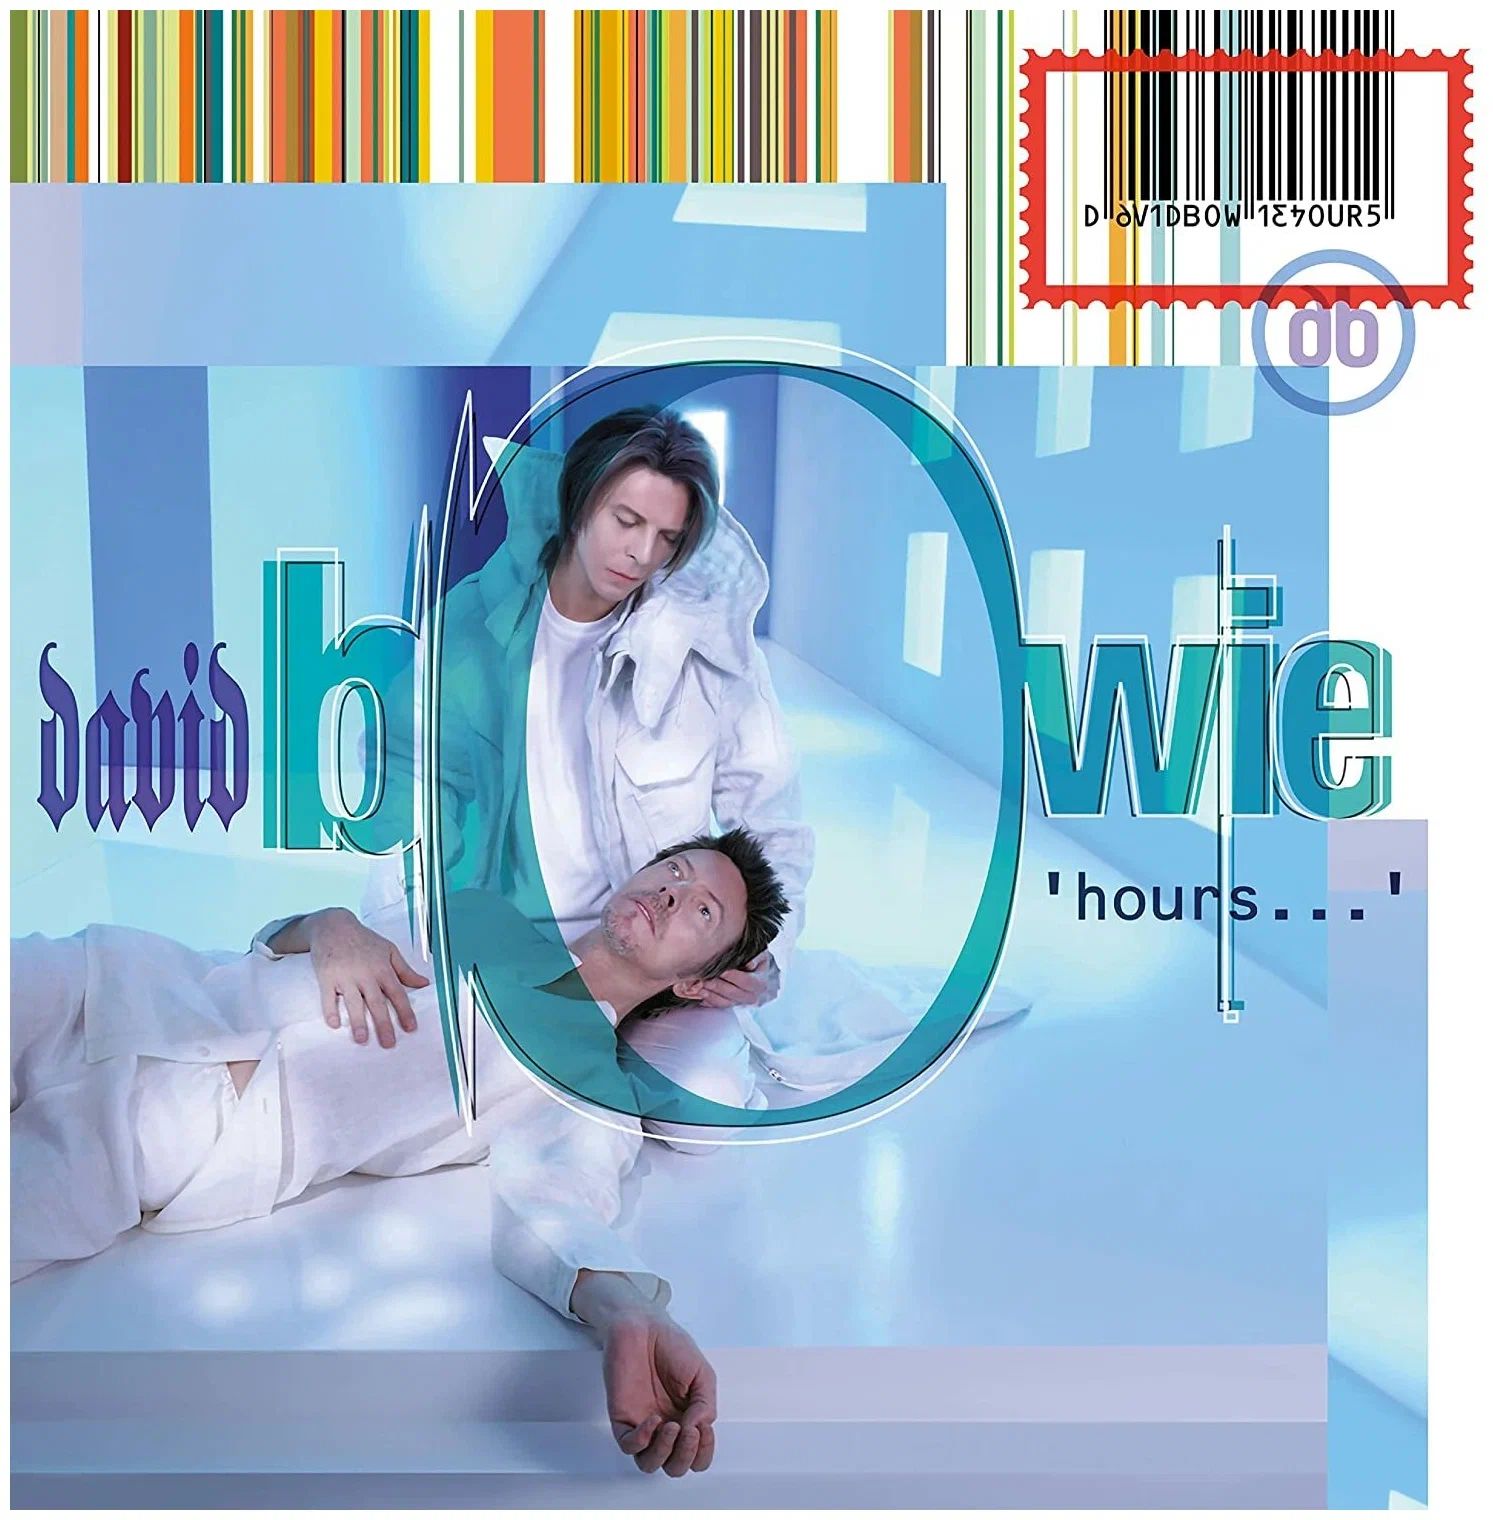 Виниловая Пластинка Bowie, David Hours (0190295253318) виниловая пластинка bowie david scary monsters and super creeps remastered 0190295842611